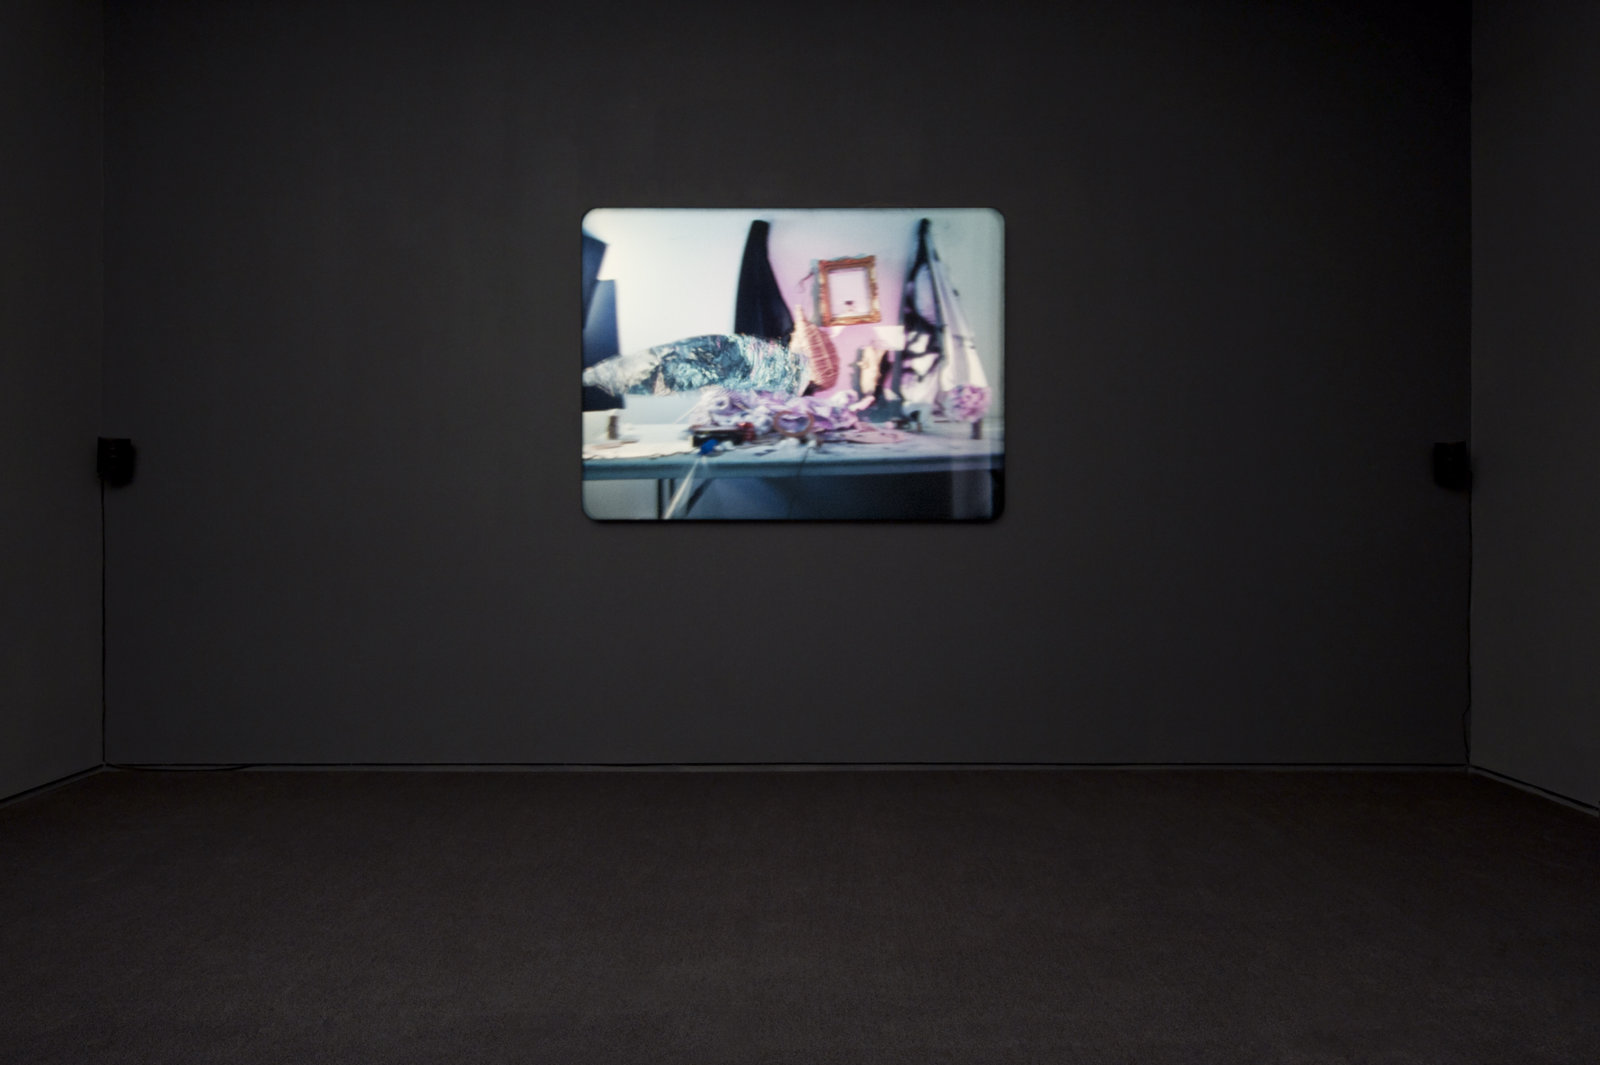 Kasper Feyrer, The artist’s studio, 2010, colour 16mm film loop with non-synchronized sound, 5 minutes, 5 seconds